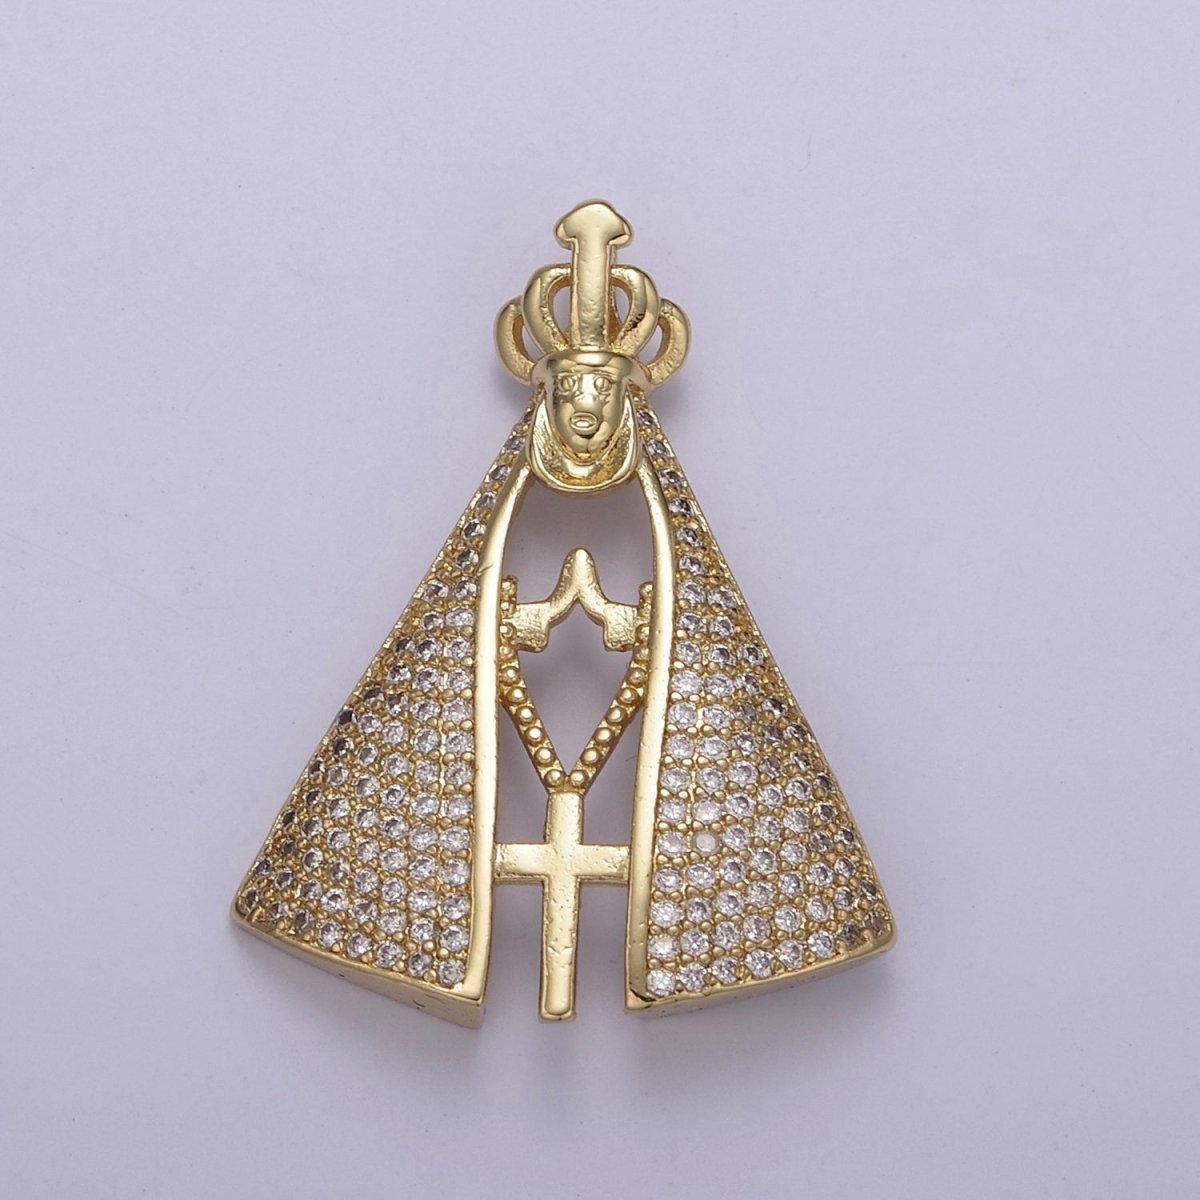 24K Gold Filled Cape Pendant for Pastor Catholic Religious Jewelry Making Supply N-538 - DLUXCA